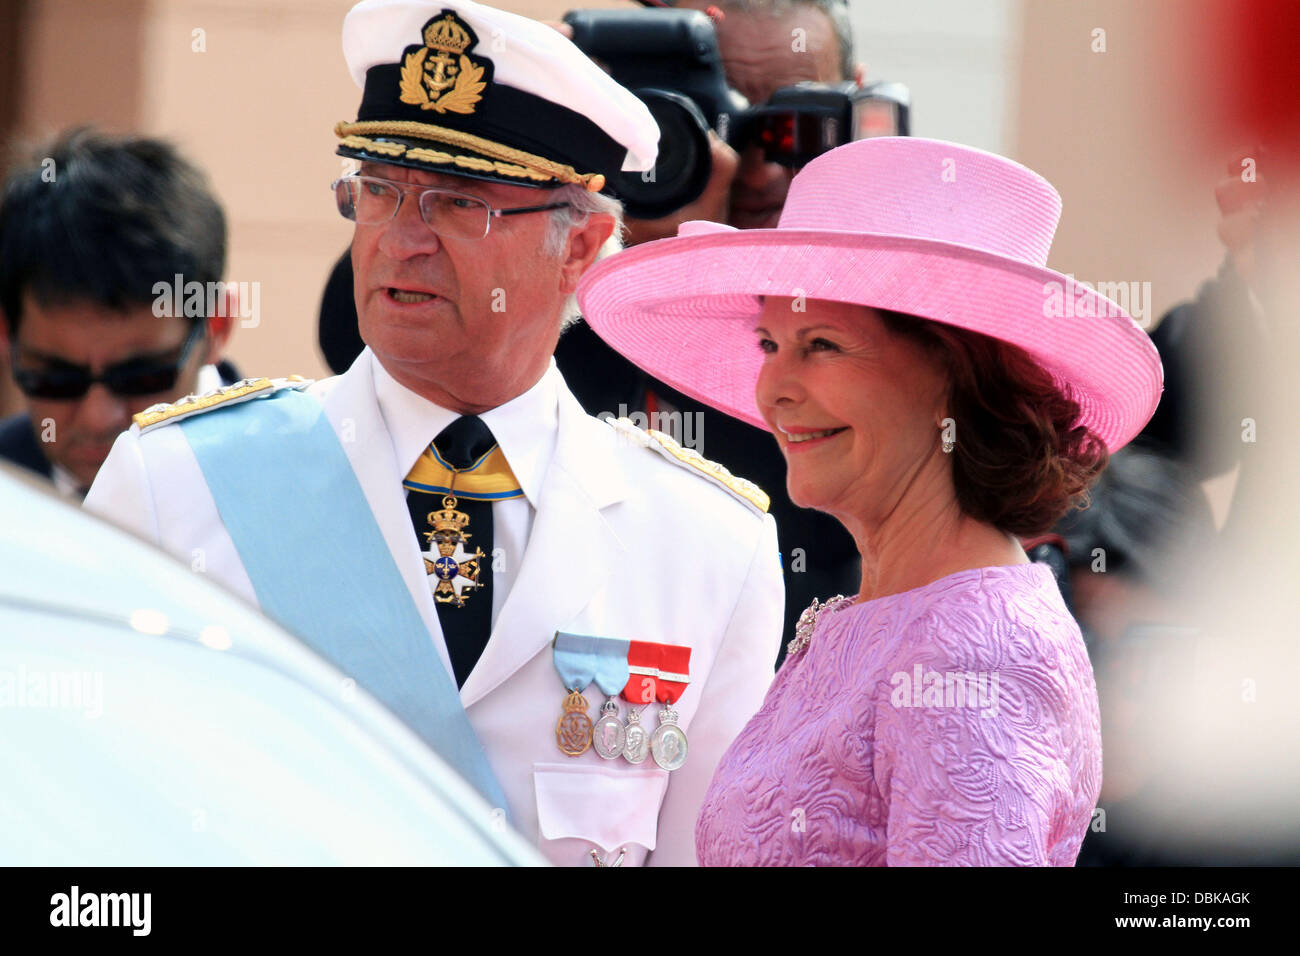 H.M. Carl XVI Gustaf, King of Sweden and Queen Silvia  Religious ceremony of the Royal Wedding of Prince Albert II of Monaco to Charlene Wittstock in the main courtyard at Prince's Palace   Monte Carlo, Monaco - 02.07.11 Stock Photo